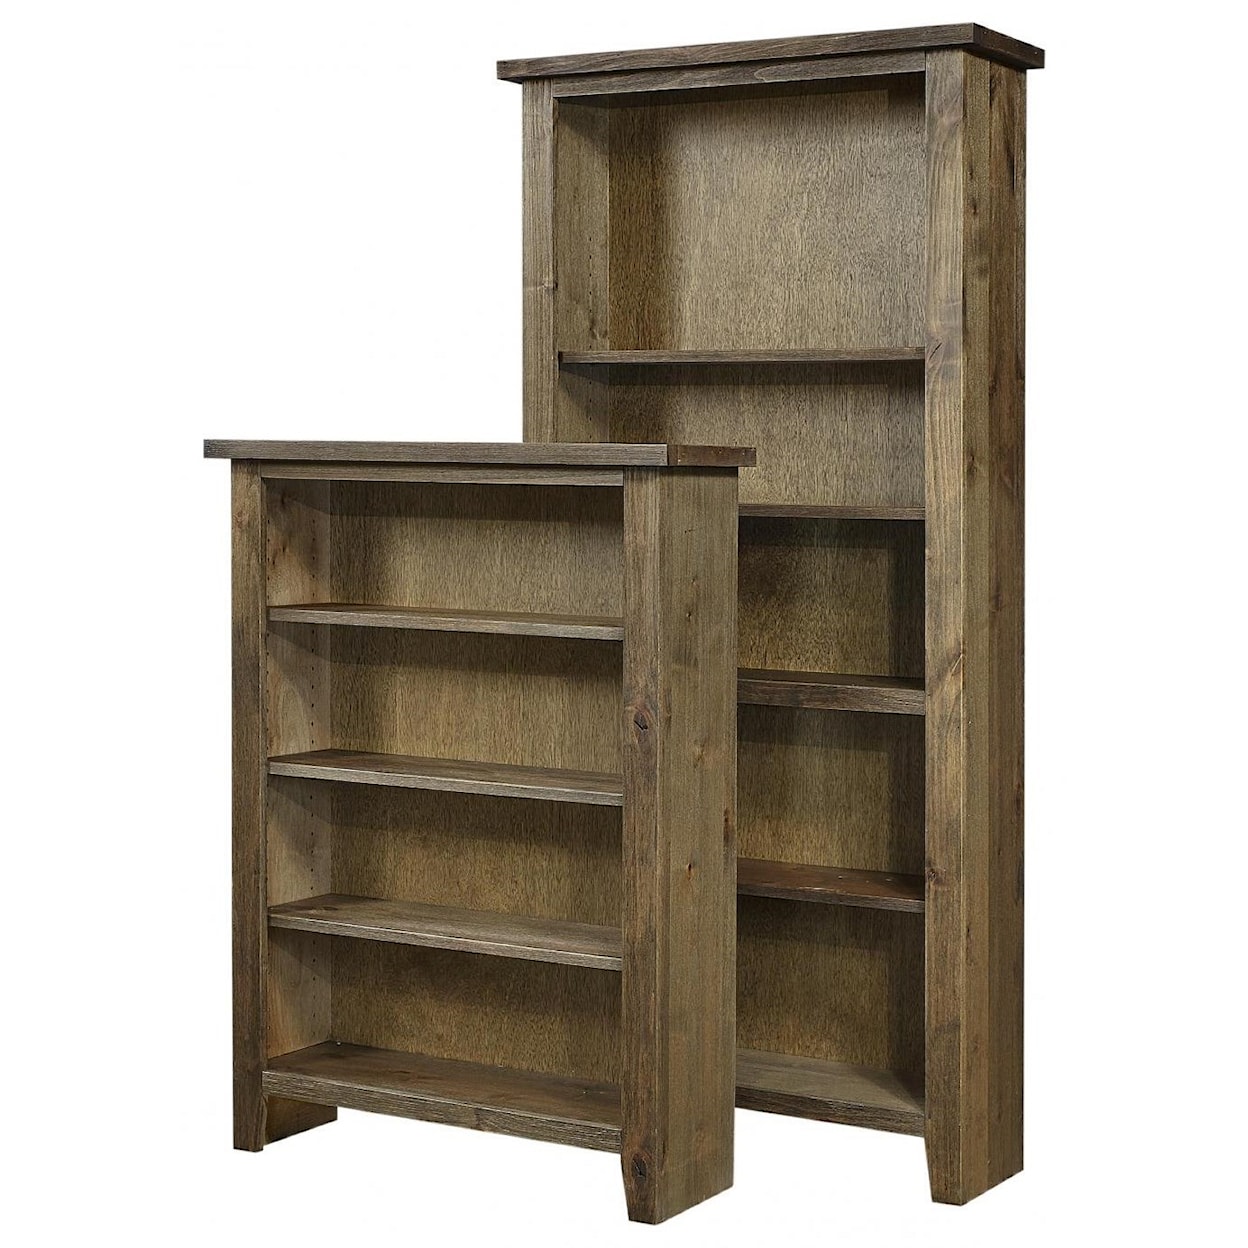 Aspenhome Alder Grove Bookcase 60" Height with 3 Shelves